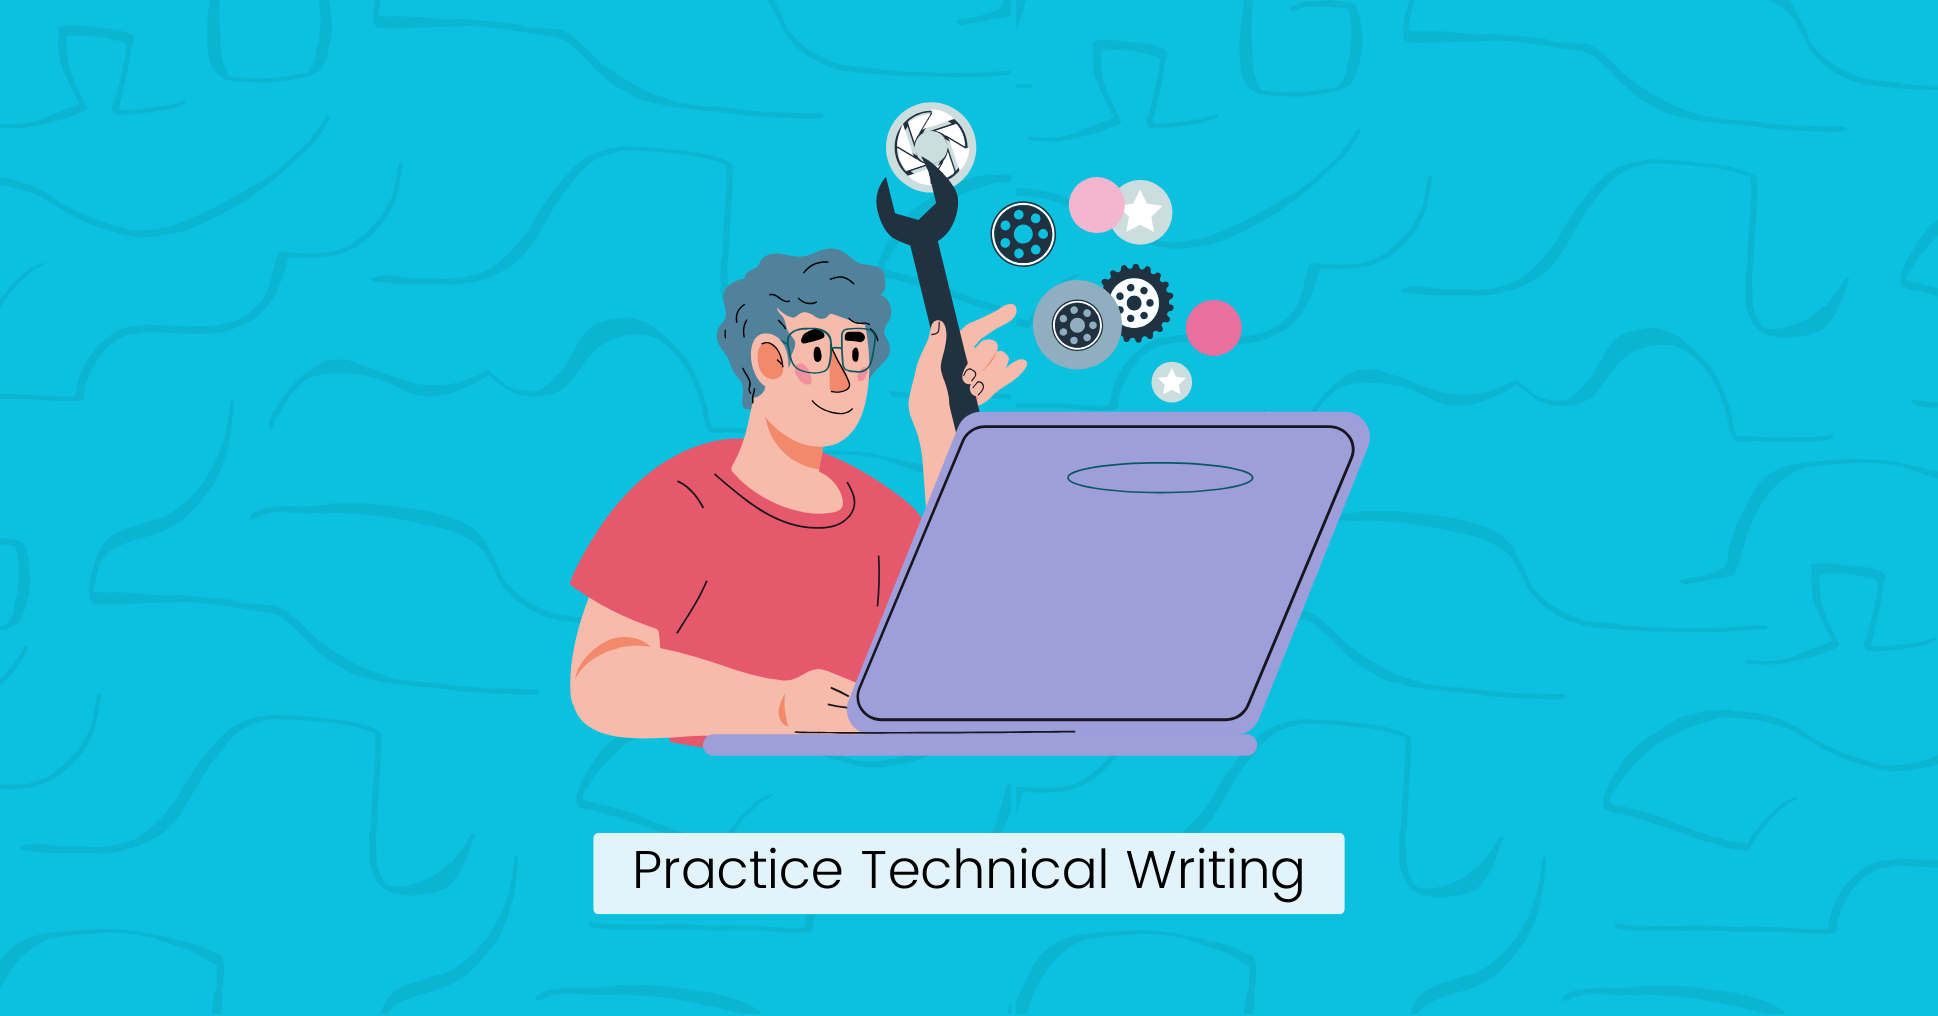 Practice Technical Writing